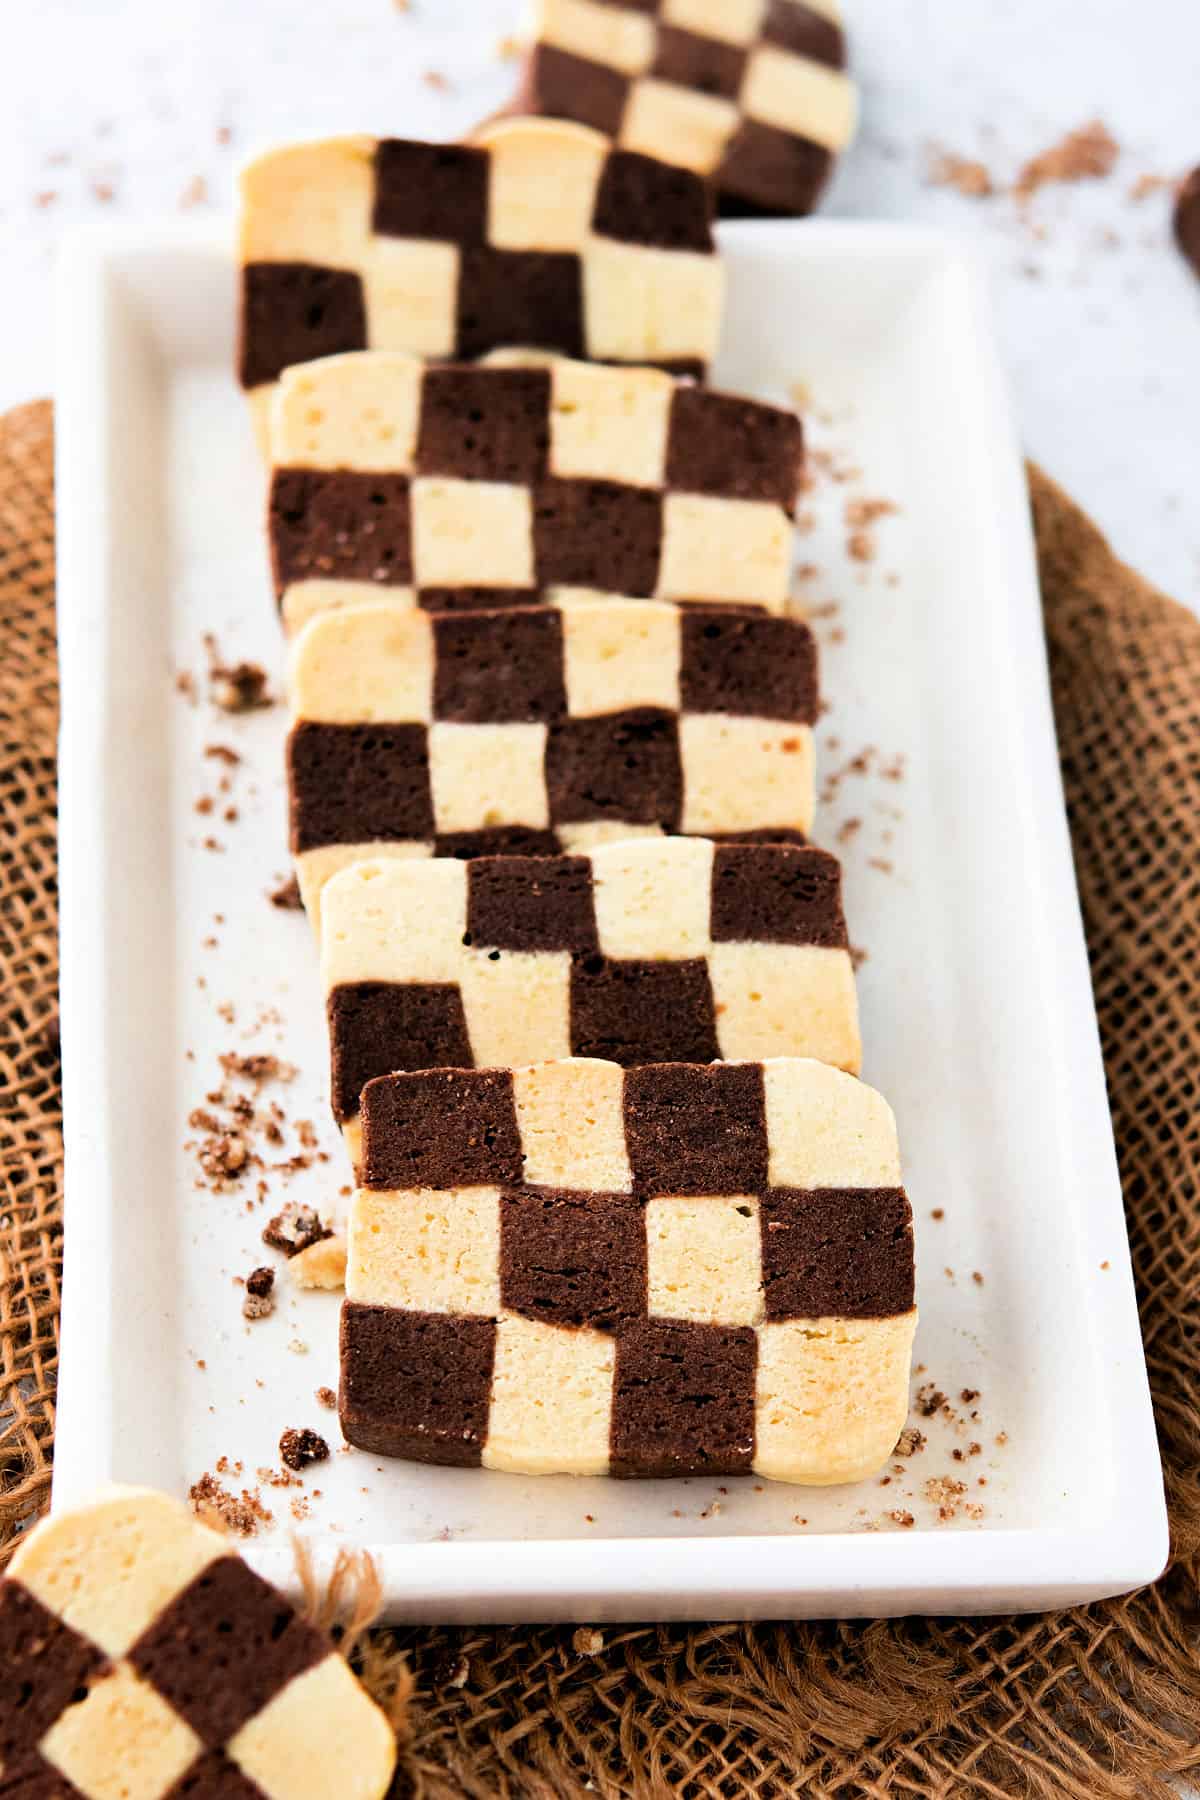 Sliced checkerboard cookies on a white oval plate.